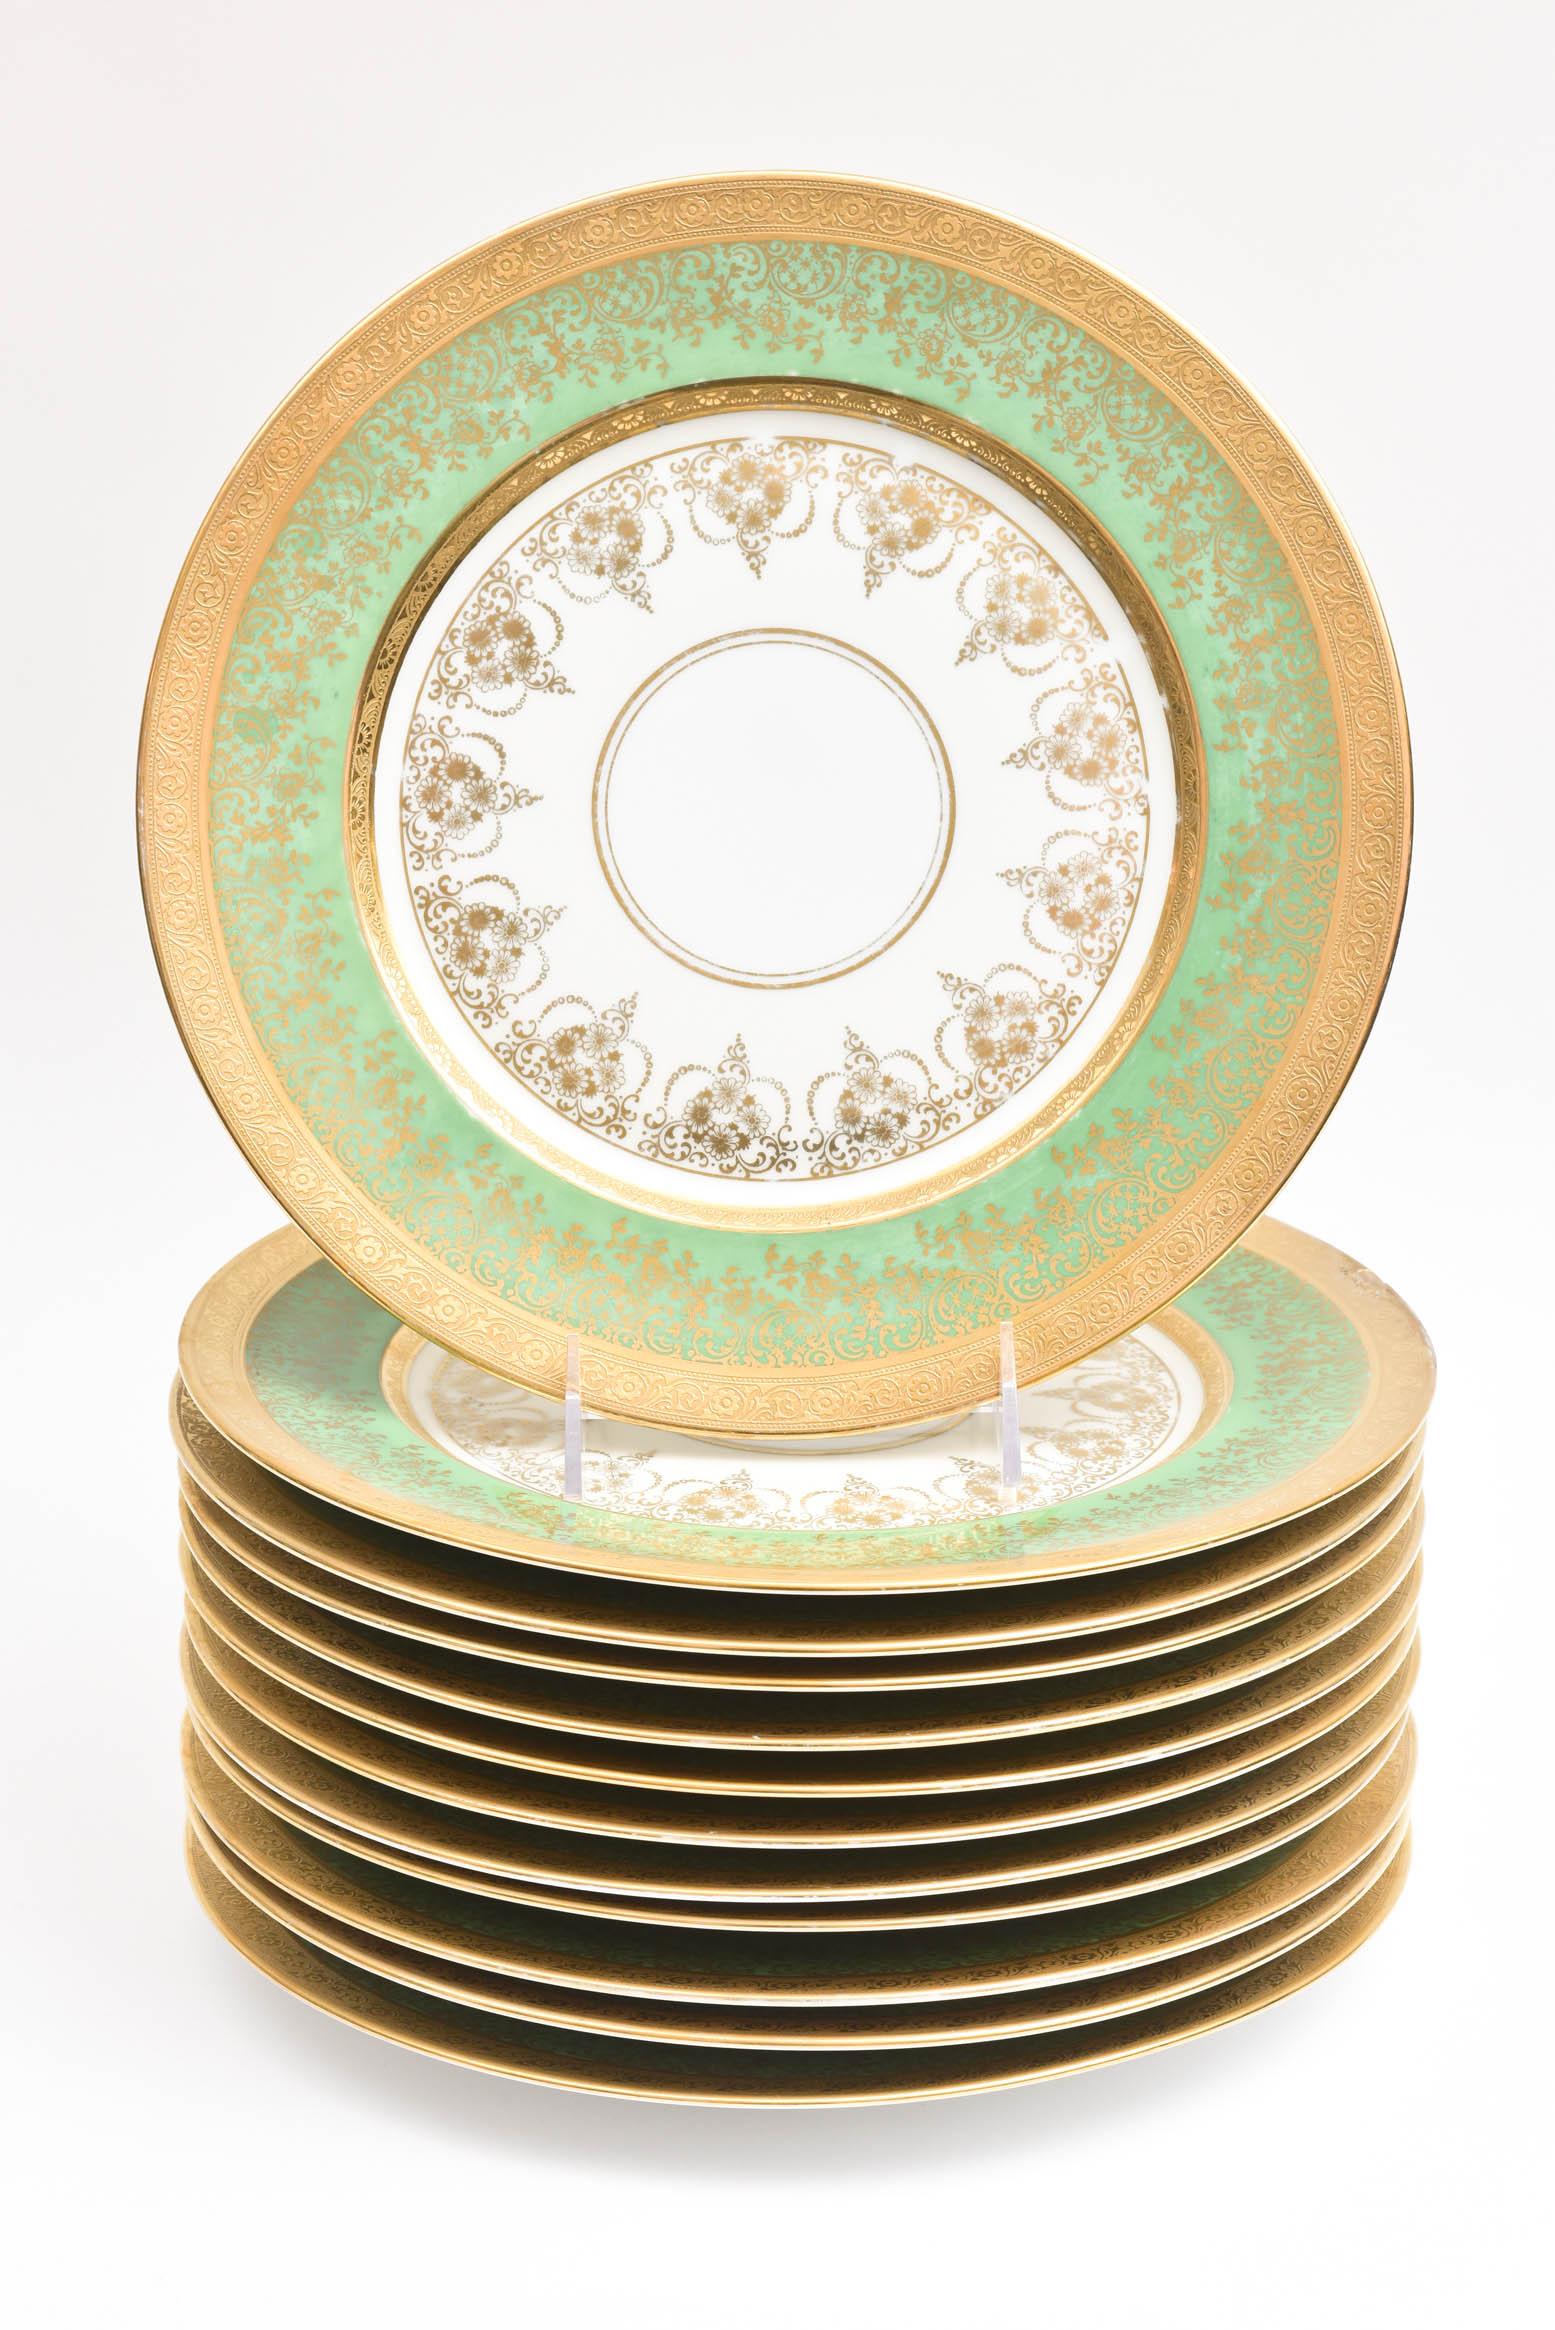 German 12 Antique Green and Gilt Encrusted Service or Presentation Plates